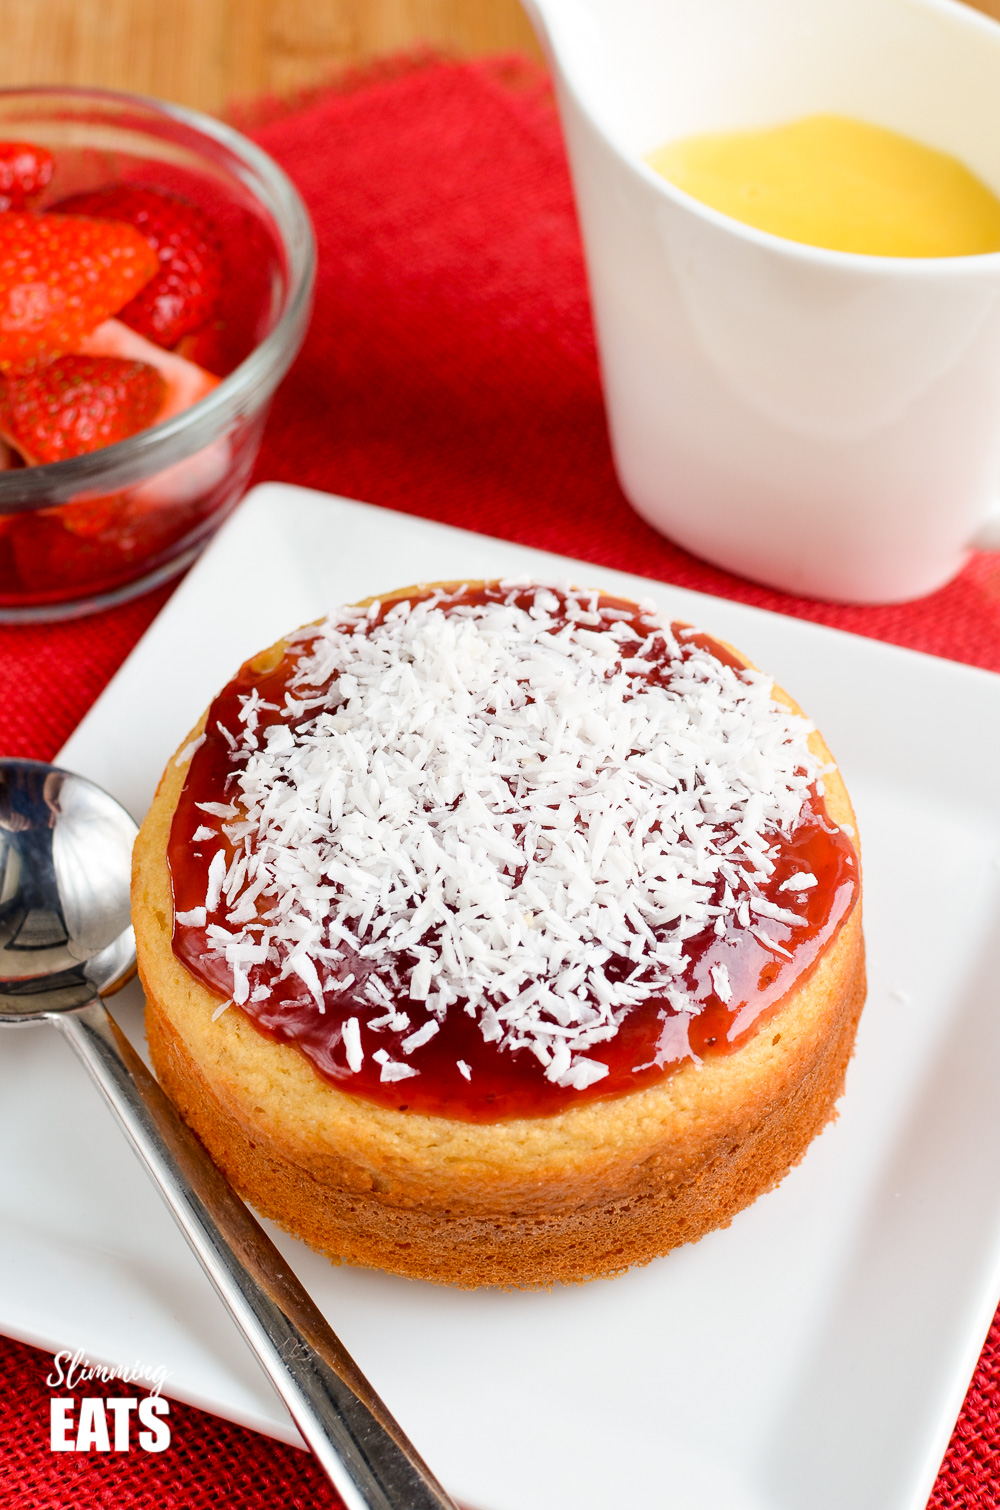 jam and coconut sponge cake on a white plate and spoon with strawberries and jug of custard